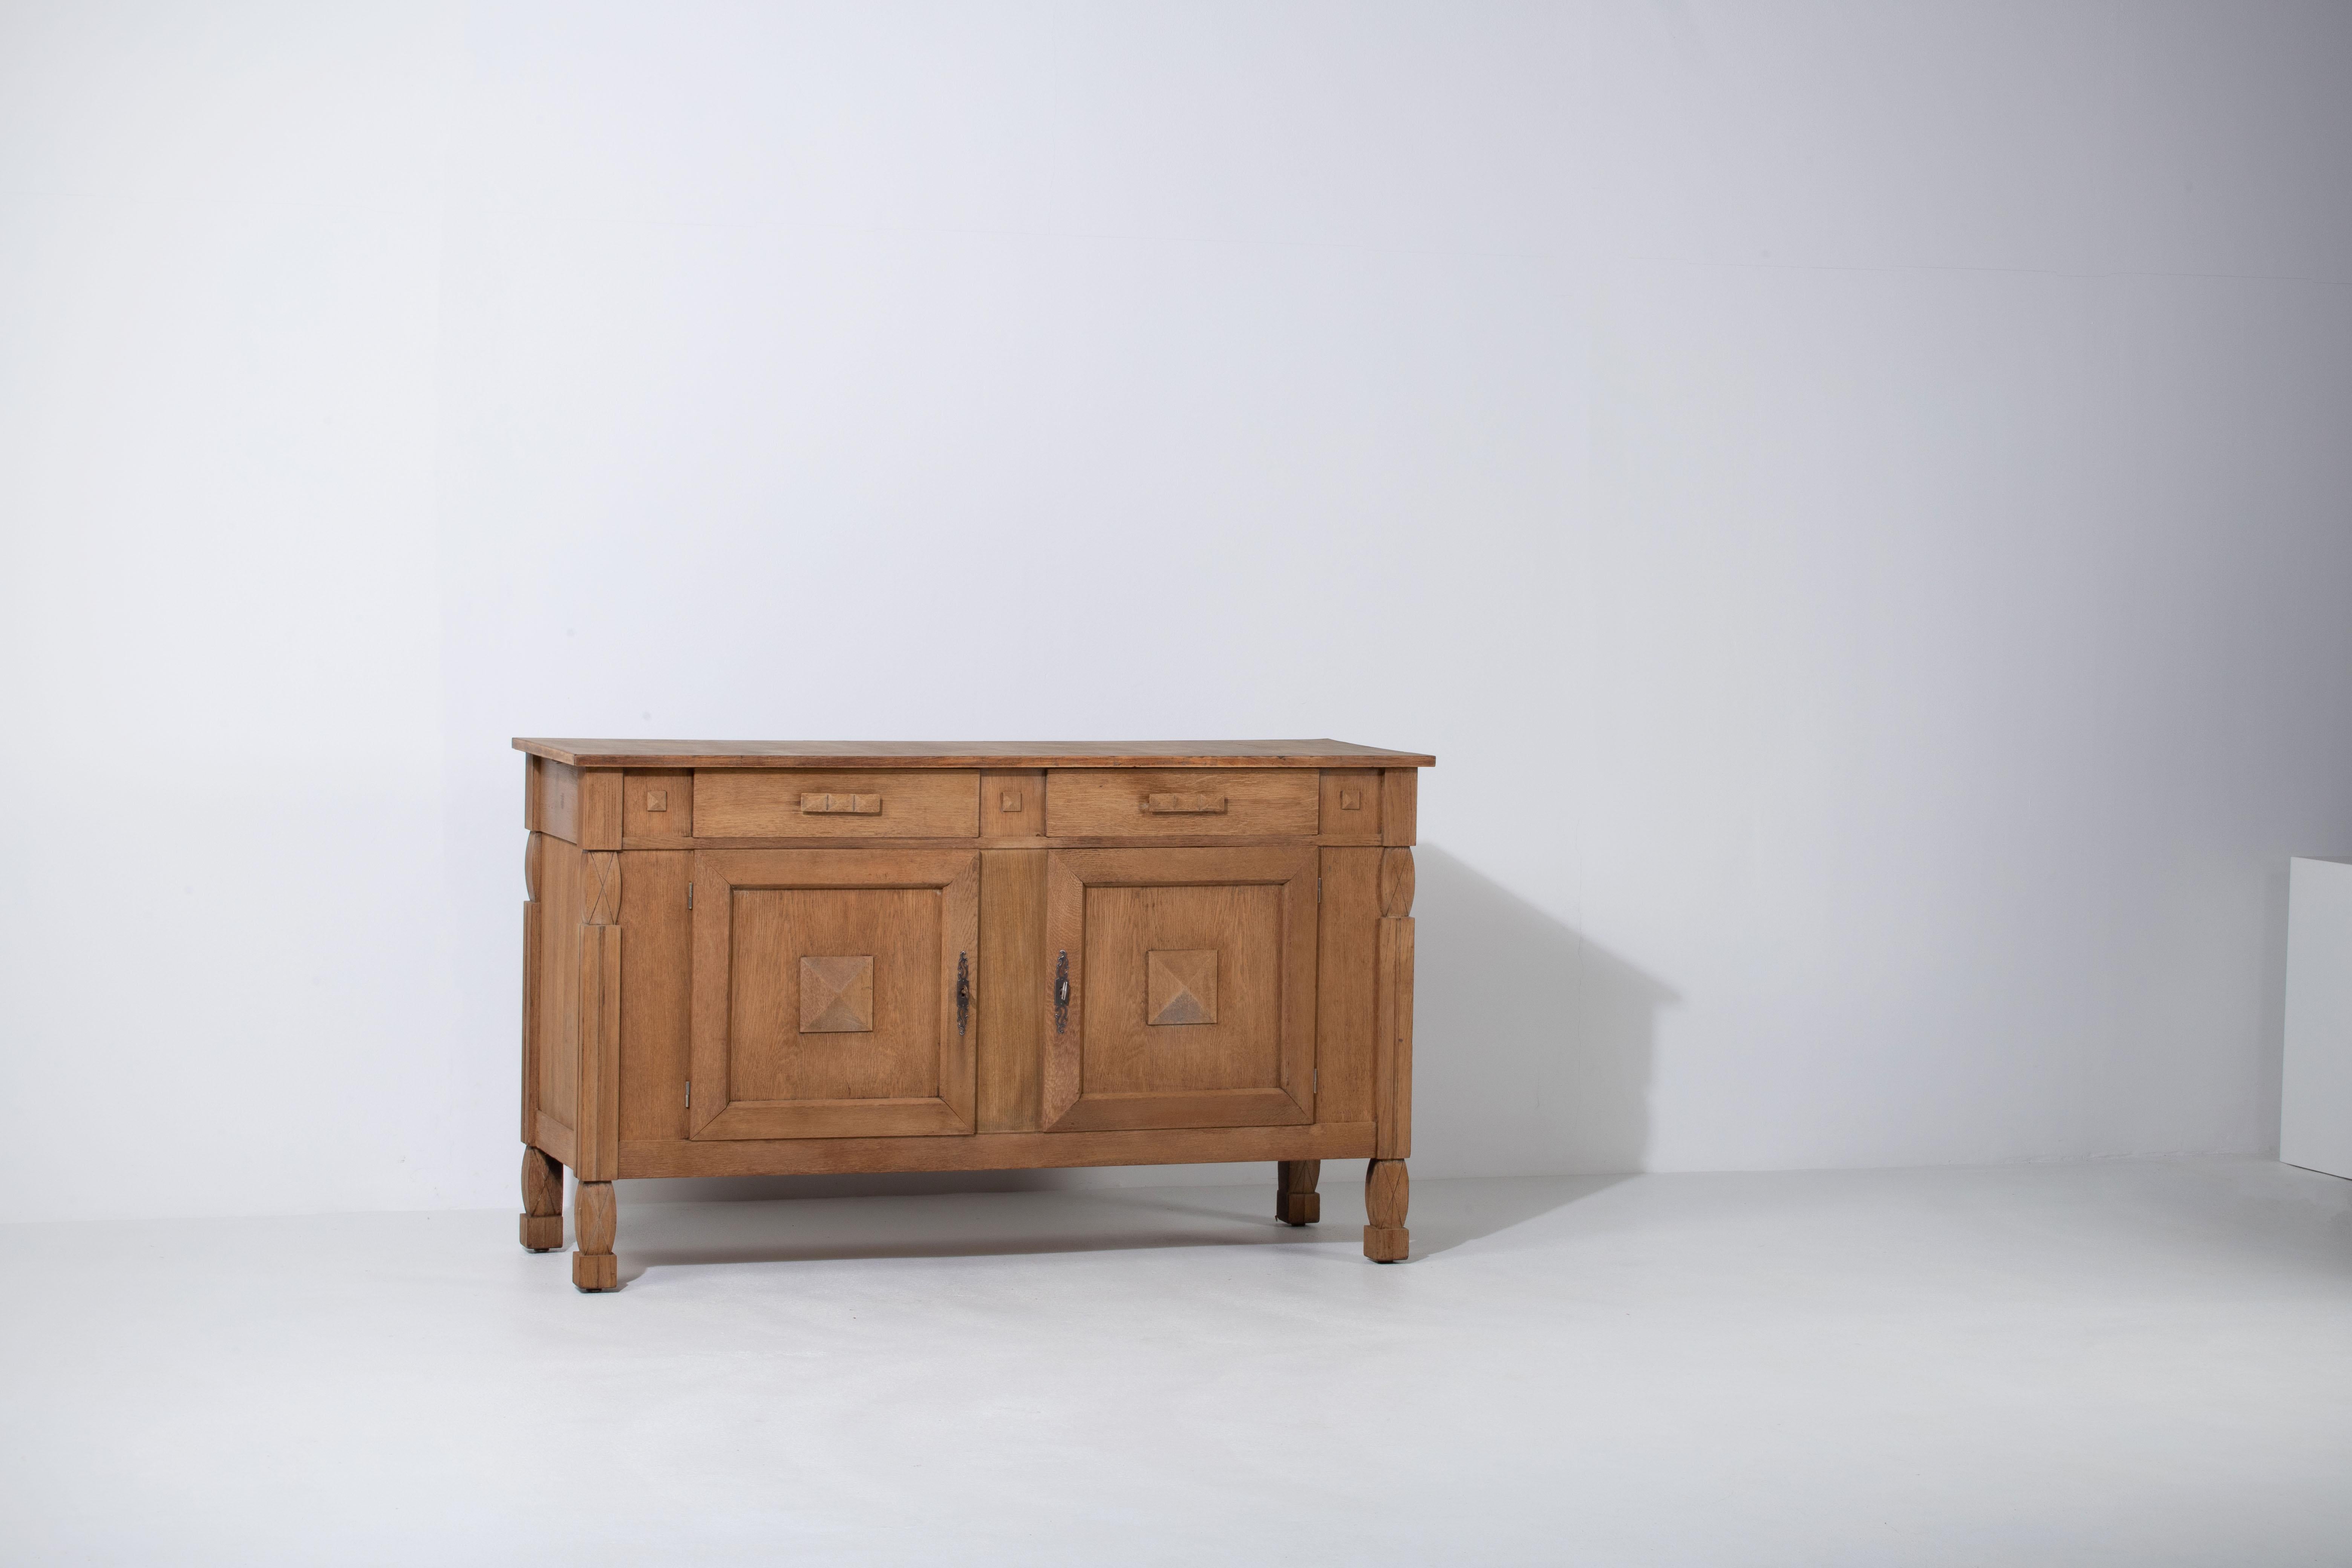 Credenza, solid oak, France, 1940s.
The credenza consists of two storage facilities and covered with very detailed designed doors.
We offer this piece in a bleached finish.